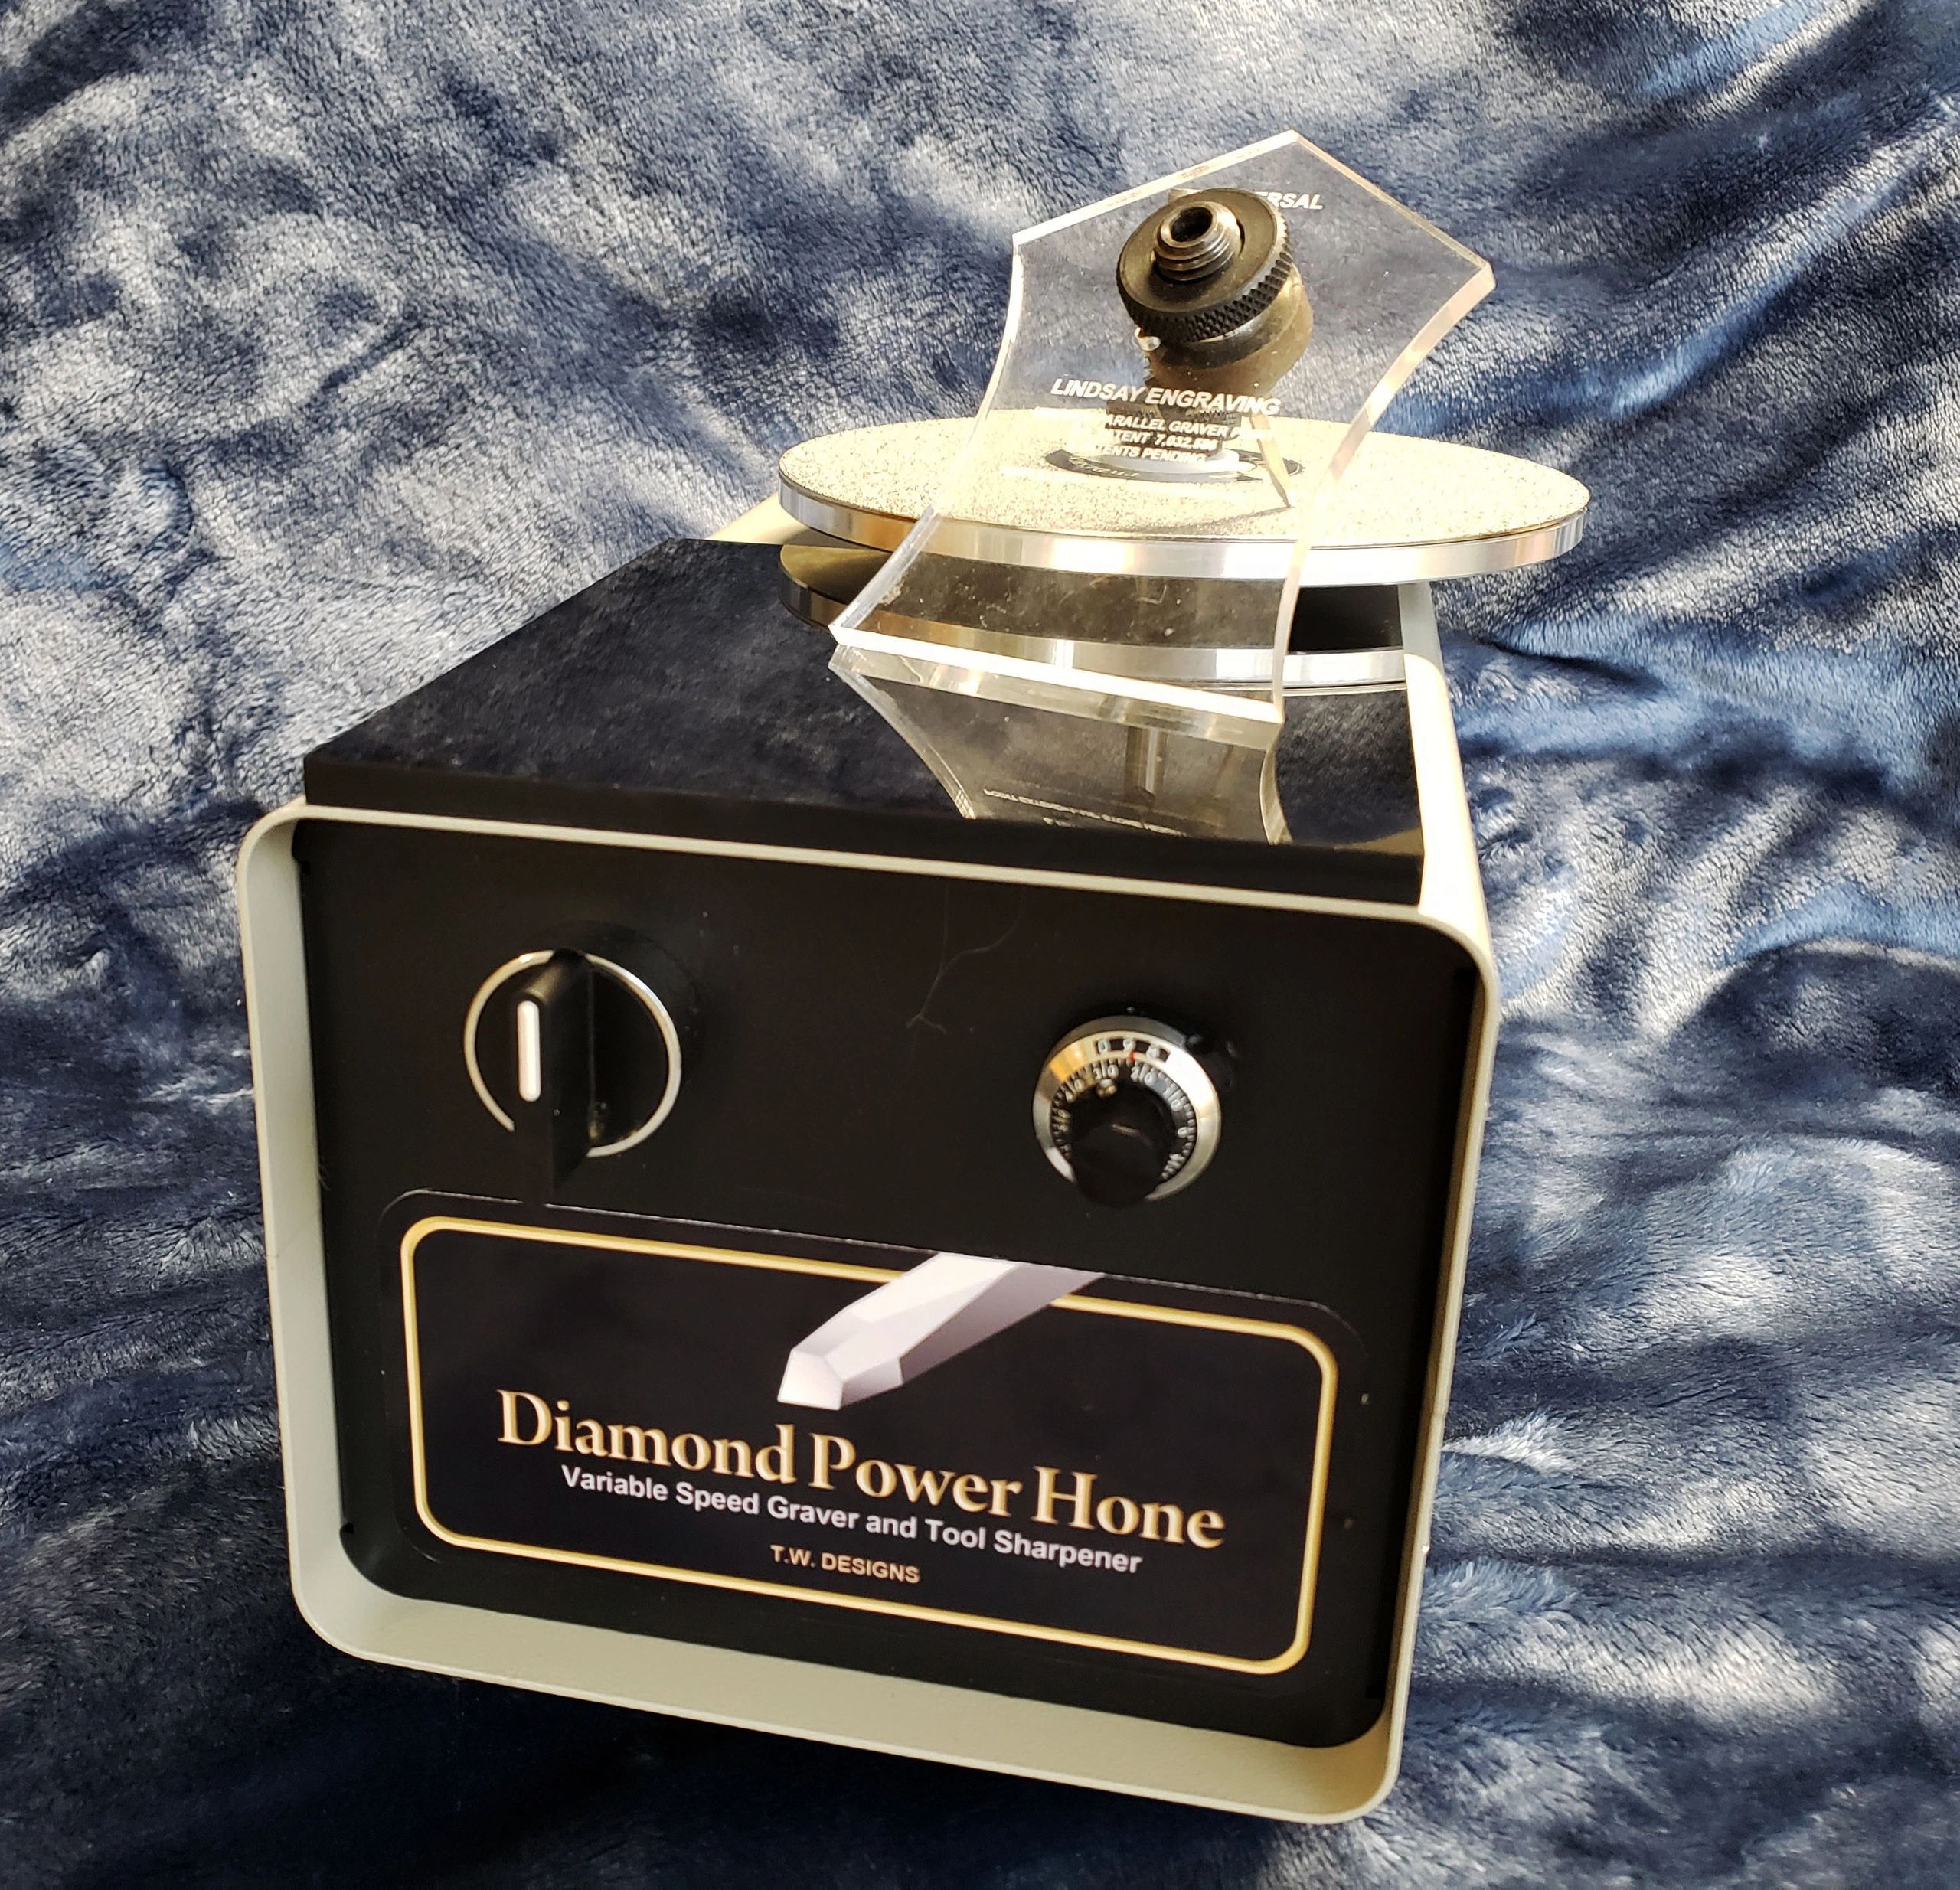 Professional Model Diamond Power Hone shown with Lindsay sharpening template